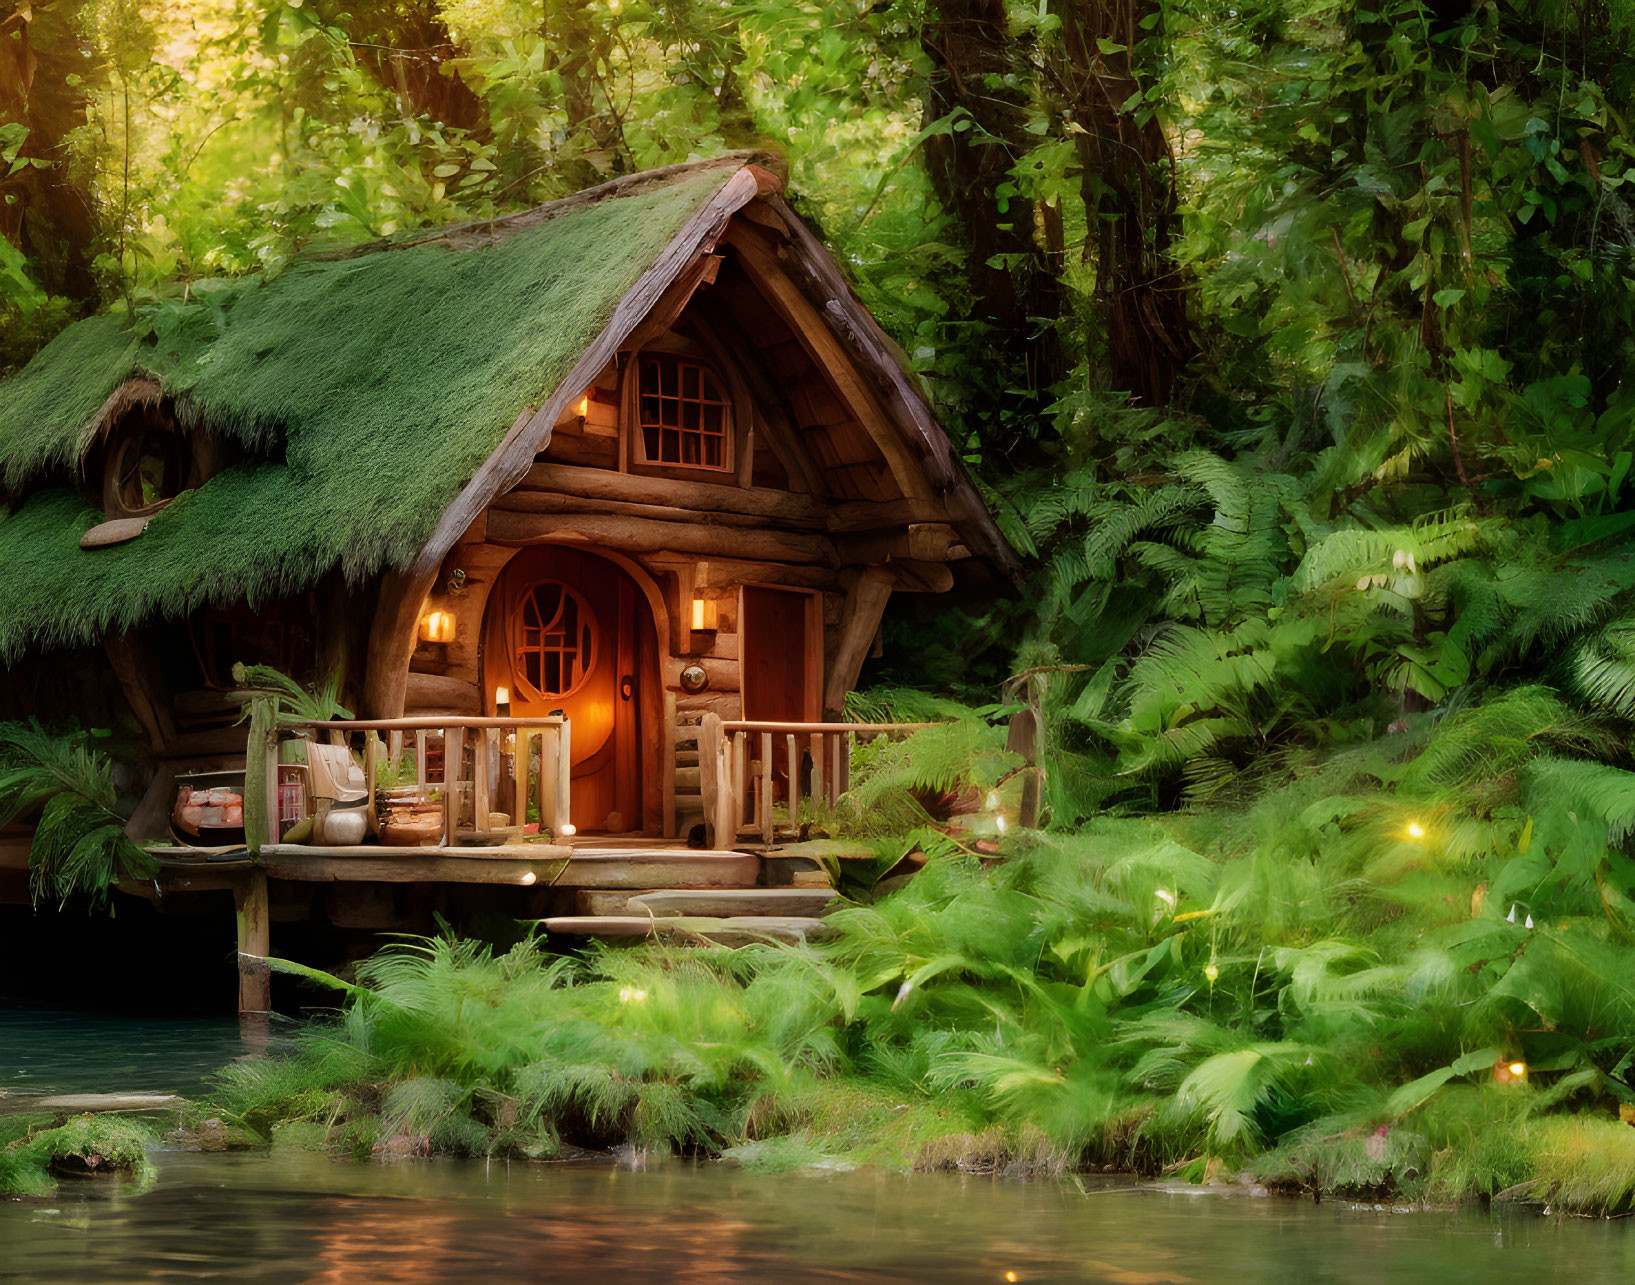 Thatched Roof Wooden Cottage in Forest Stream Twilight